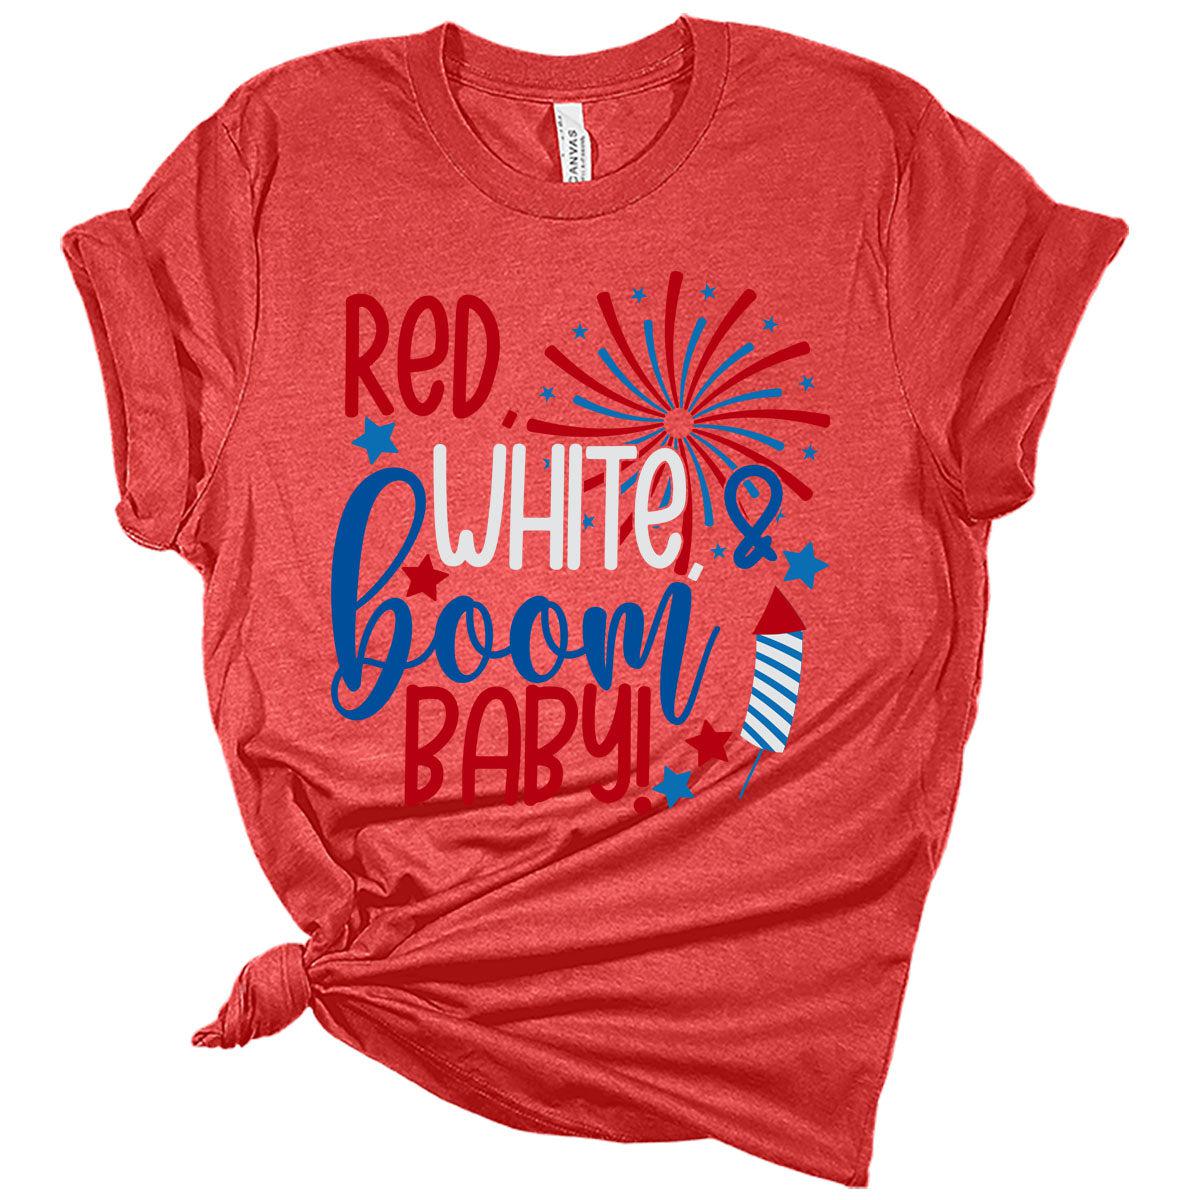 Red White And Boom Baby Fireworks Patriotic Women's 4th Of July Graphic Tee